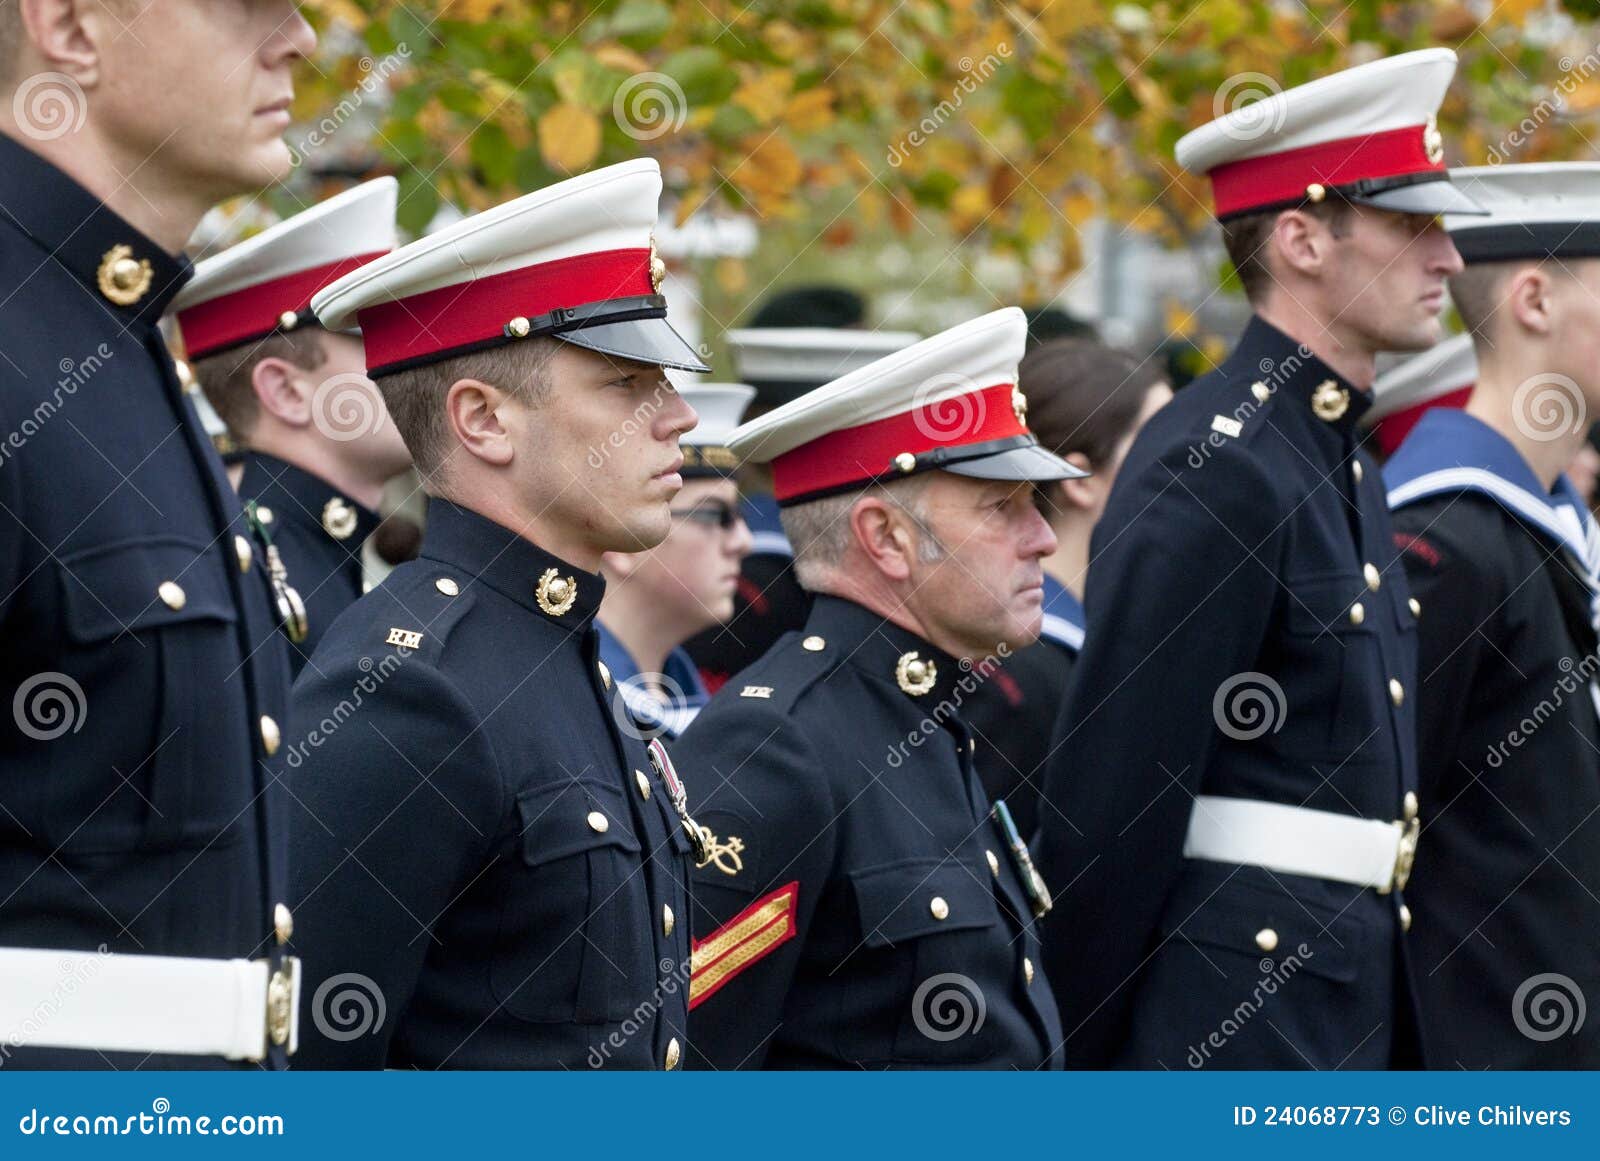 Soldiers Stand To Attention a the Rememberance Day Editorial Stock ...